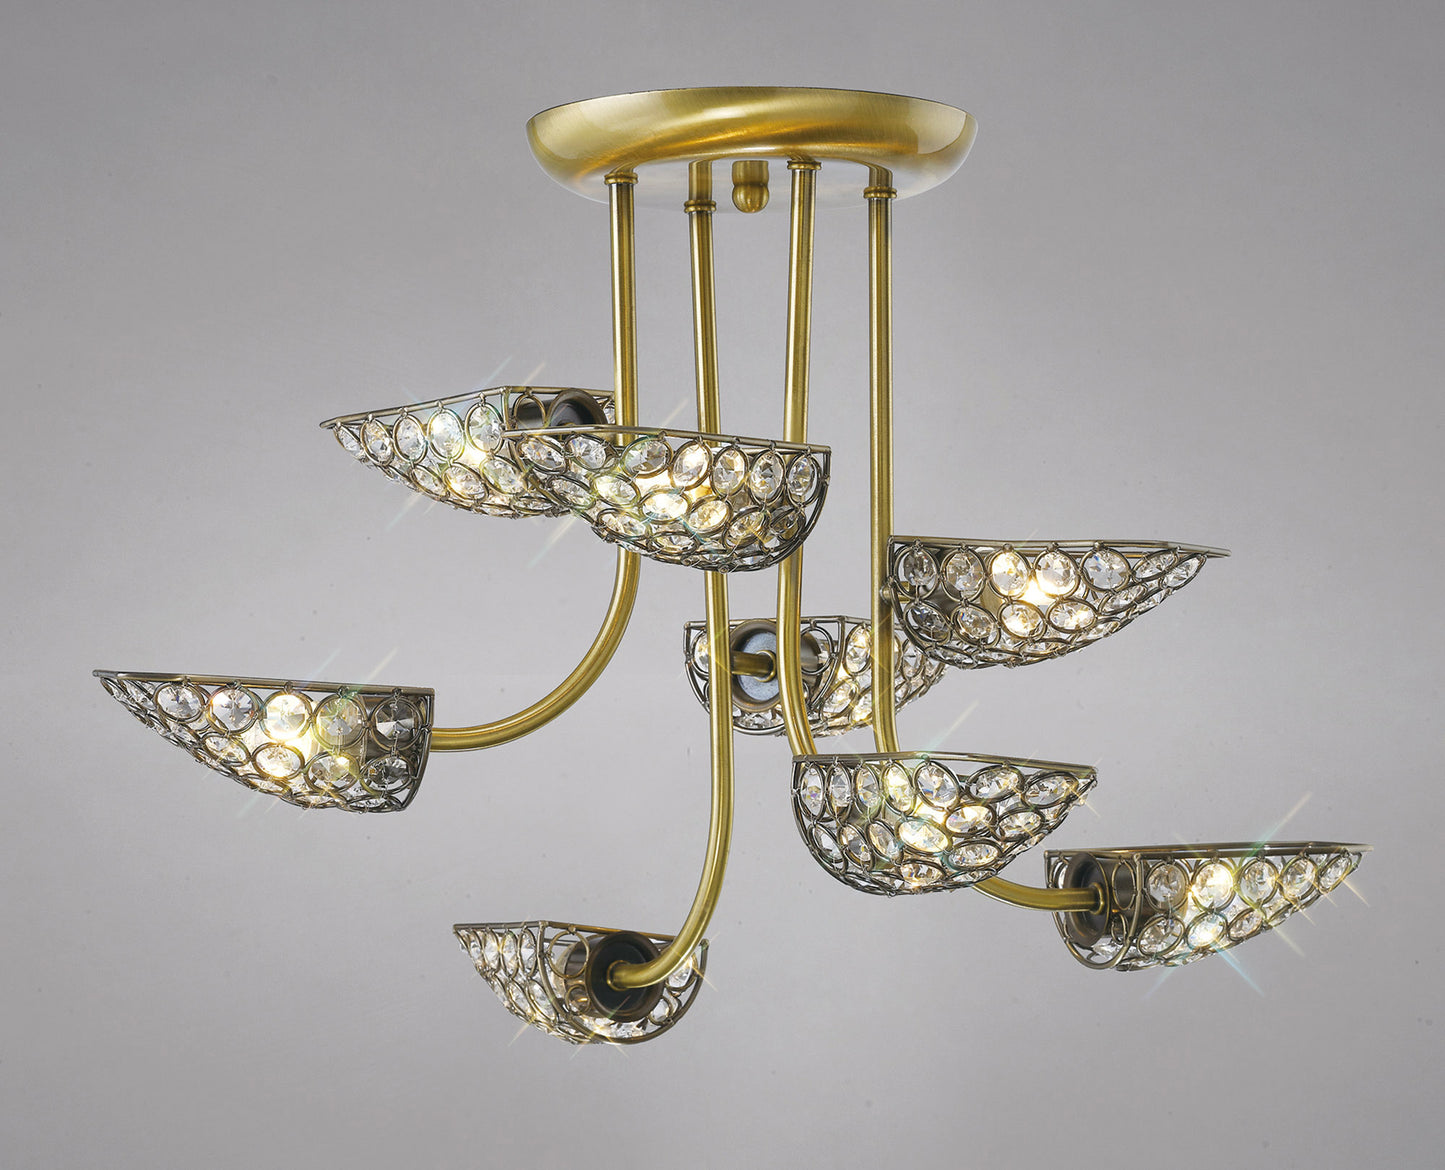 Ashton Antique Brass and Crystal Pendant with g9 Lamp holders  (Diyas IL20702)